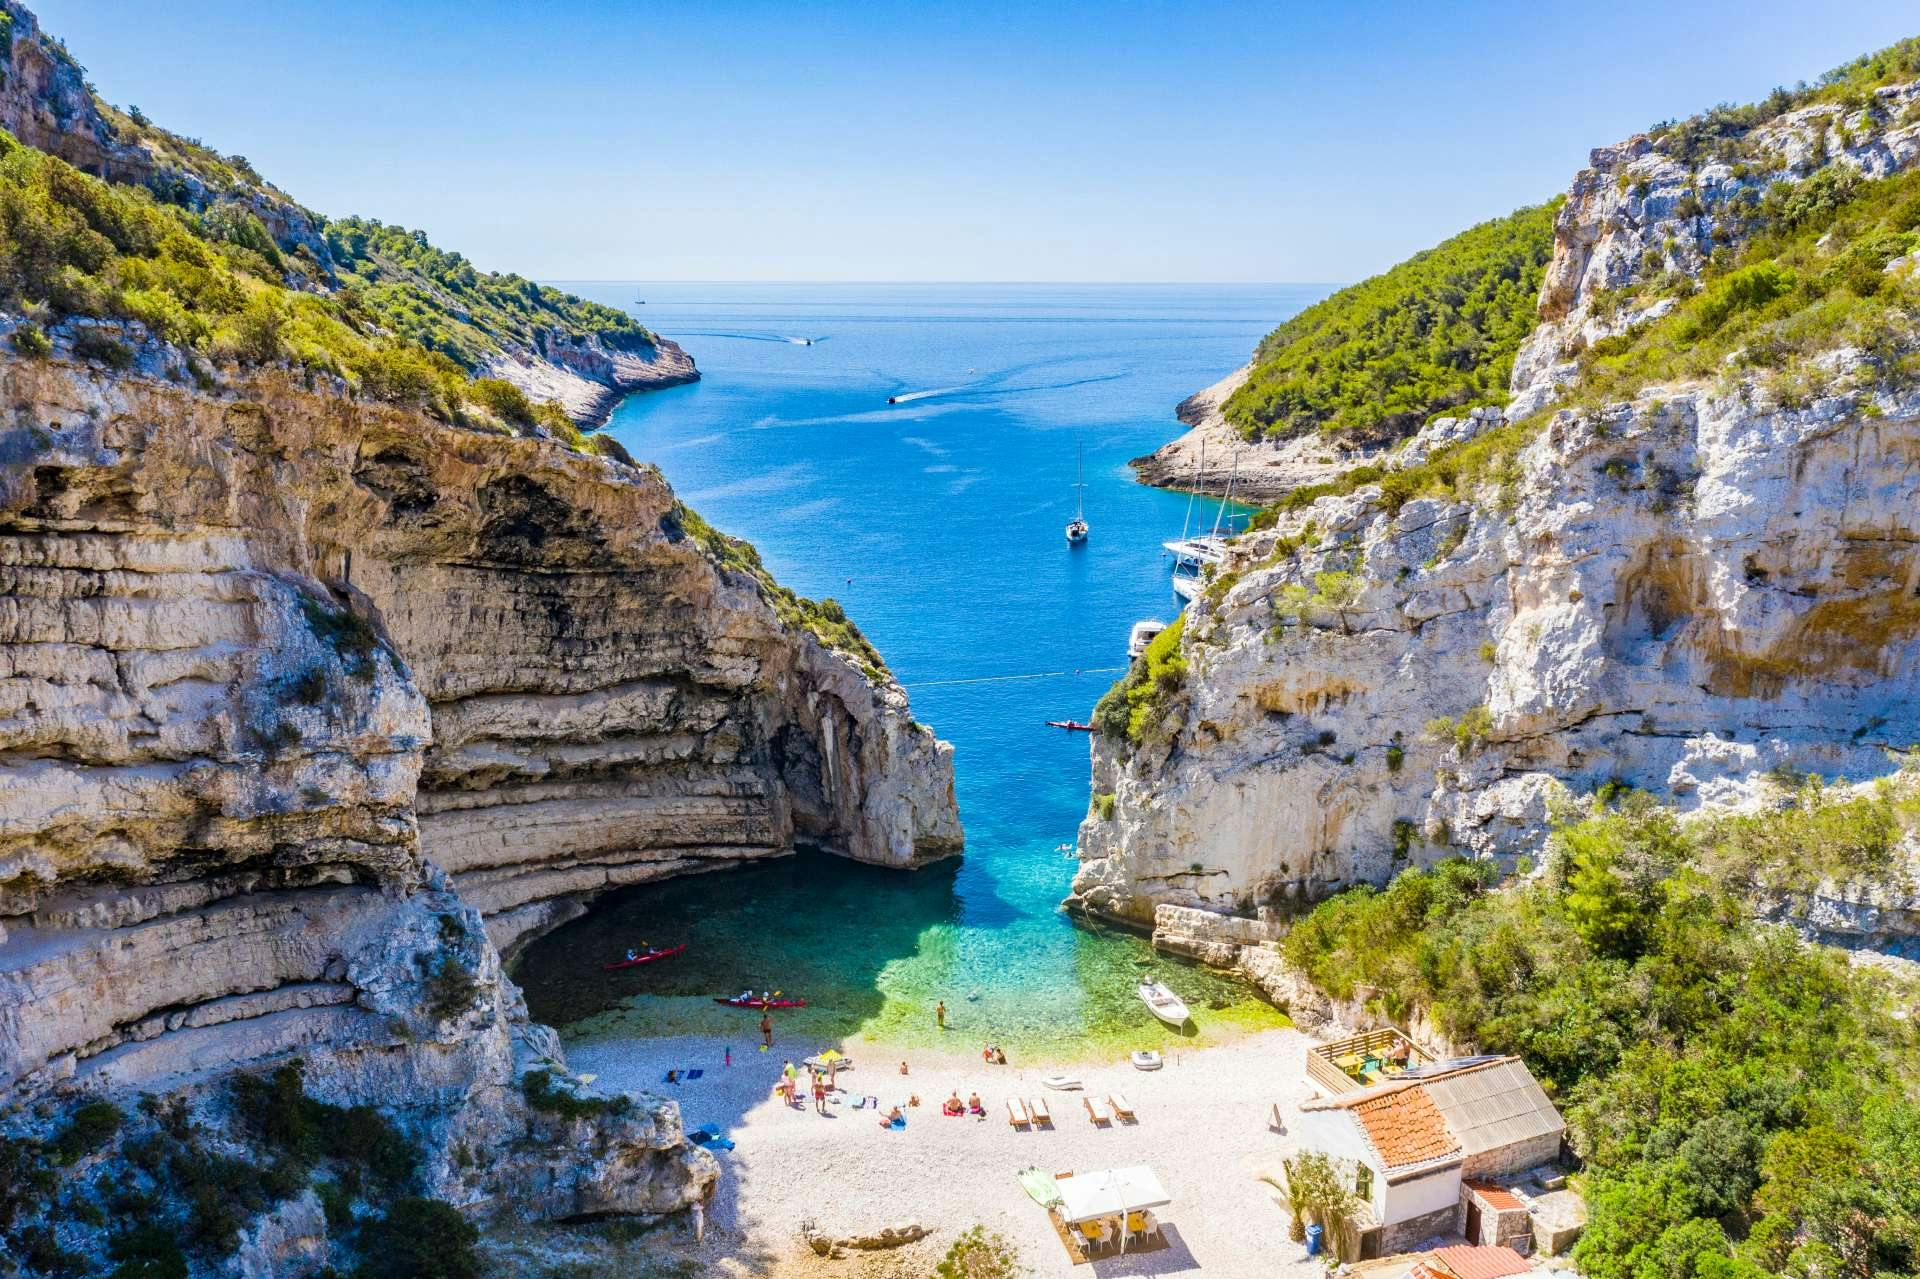 The most beautiful beach in Croatia and also once voted the most beautiful beach in Europe. We will make a swim stop here, usually for 30 minutes, so you will have enough time to swim to the shore and maybe even grab a snack or drink in the small beach bar.